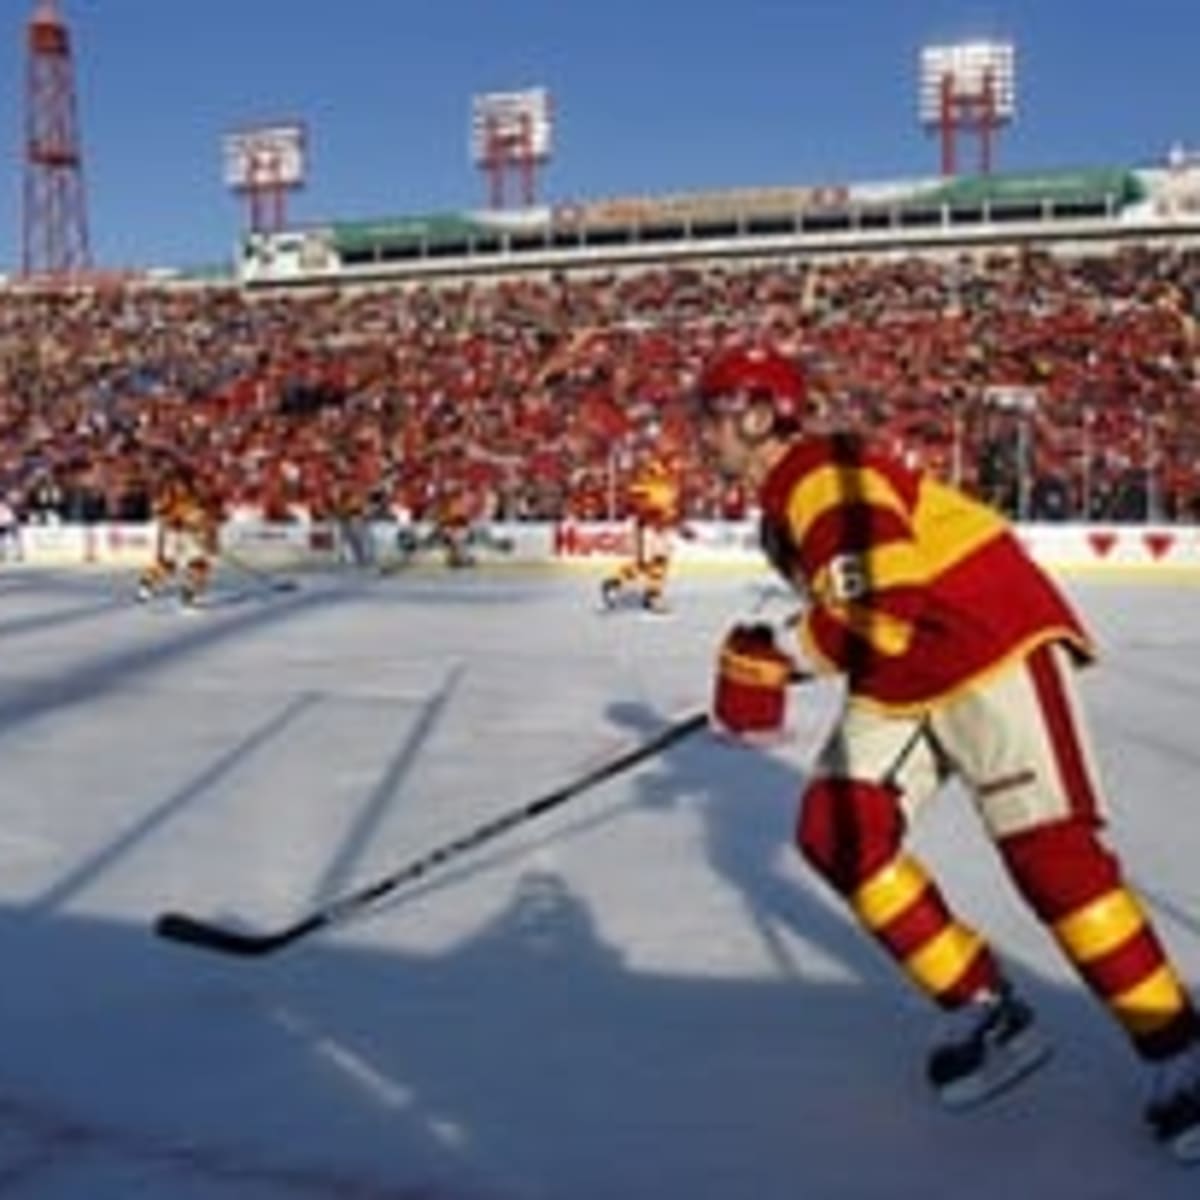 Calgary Flames drop Heritage Classic to Winnipeg Jets in overtime